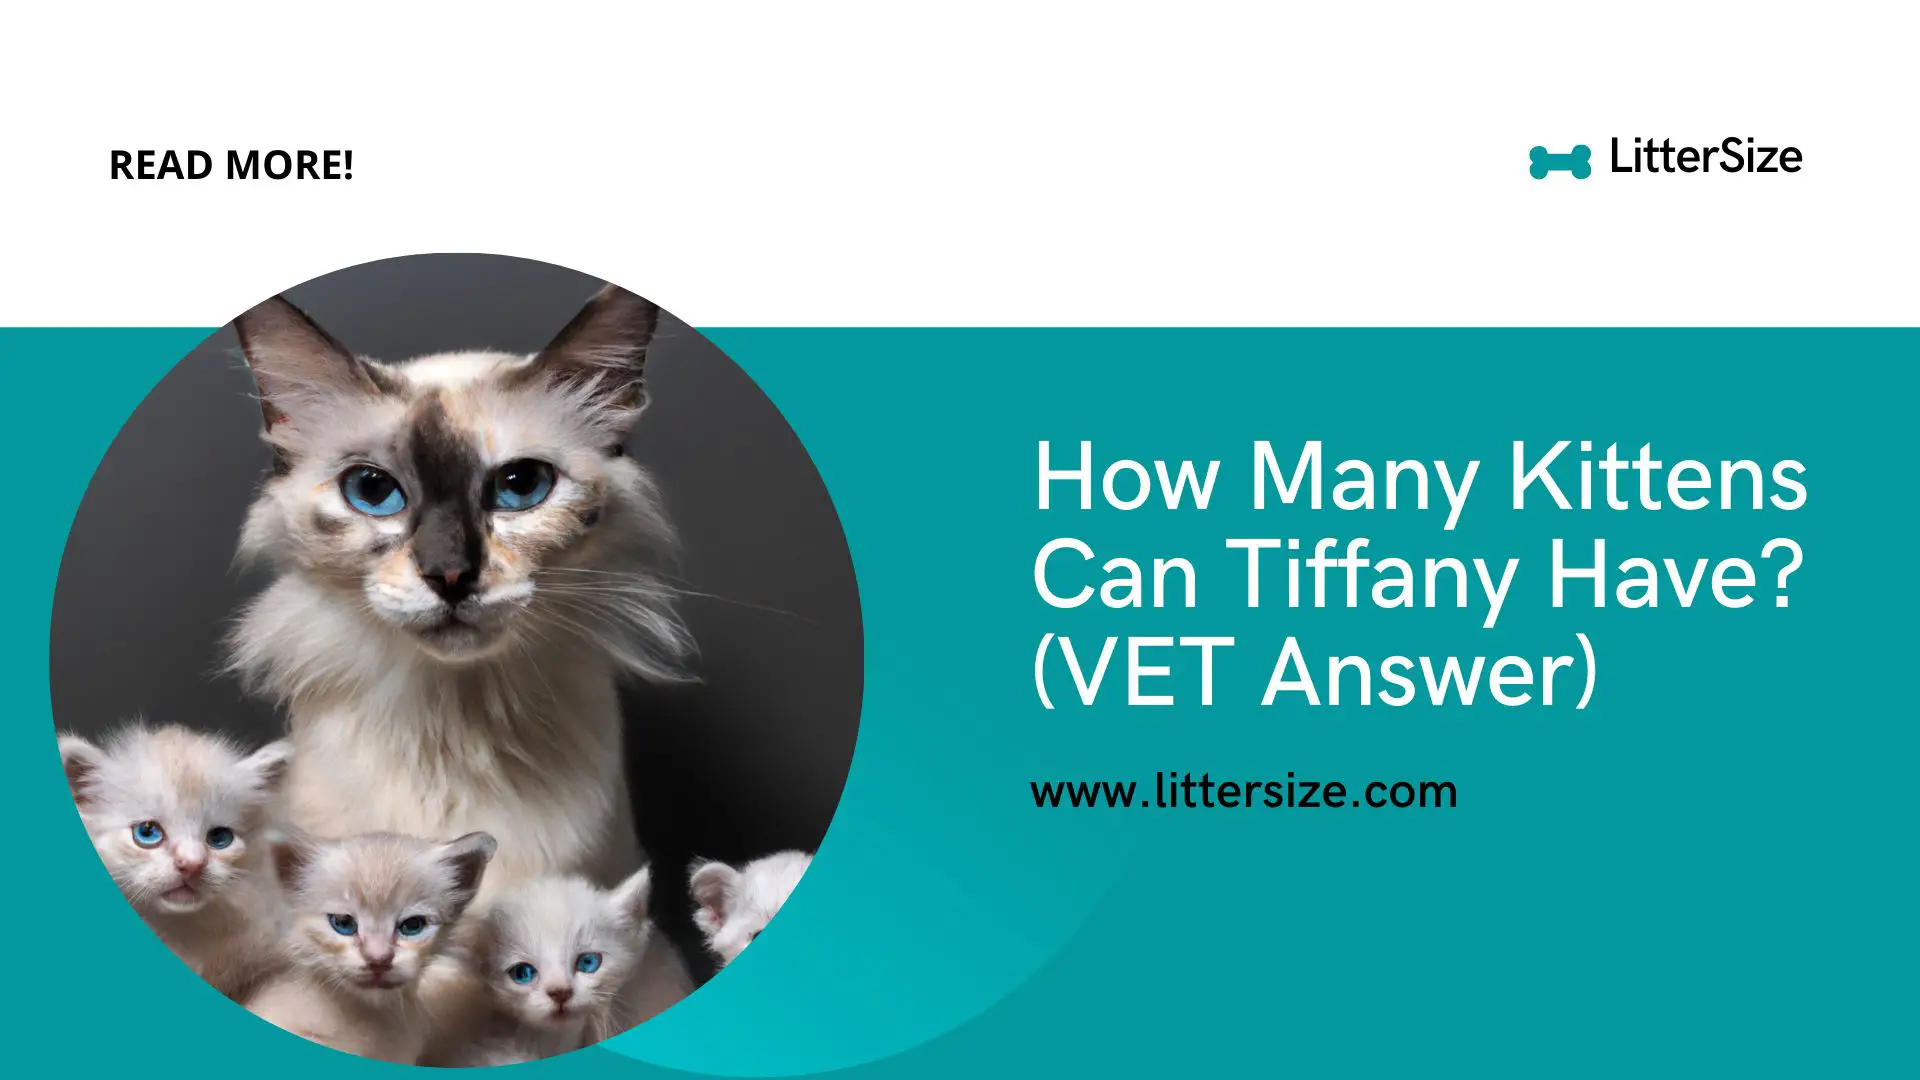 How Many Kittens Can Tiffany Have? (VET Answer)